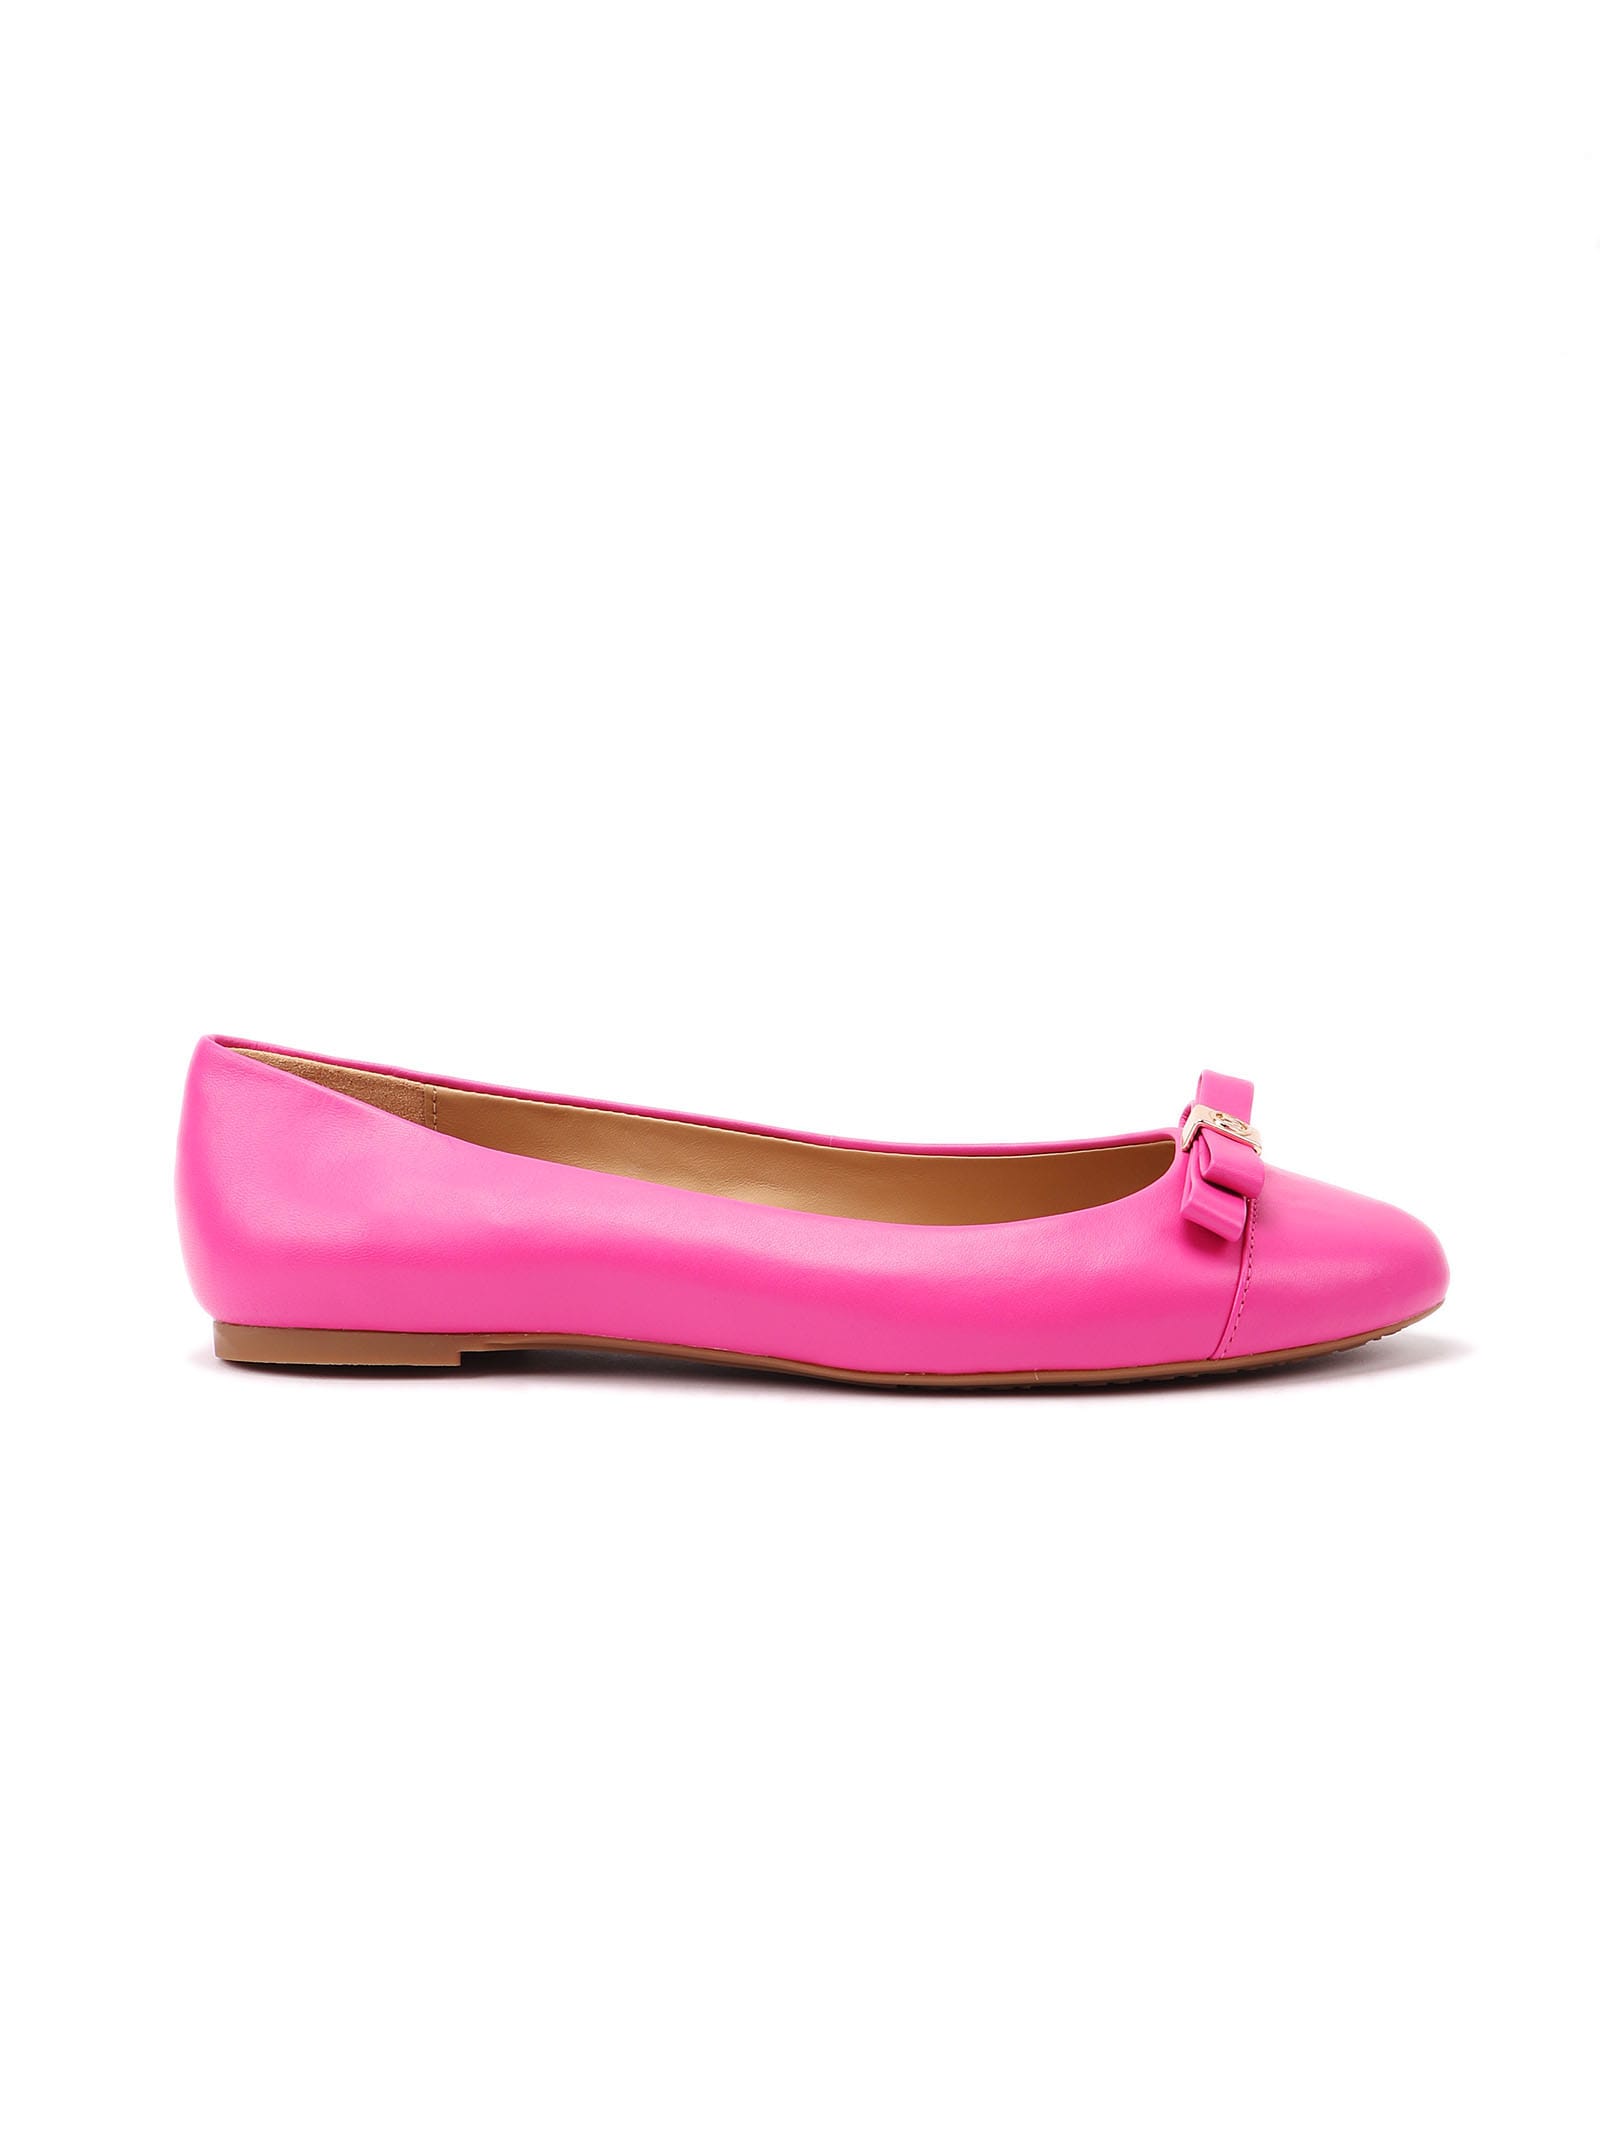 MICHAEL KORS ANDREA BALLET FLATS IN FUXIA LEATHER